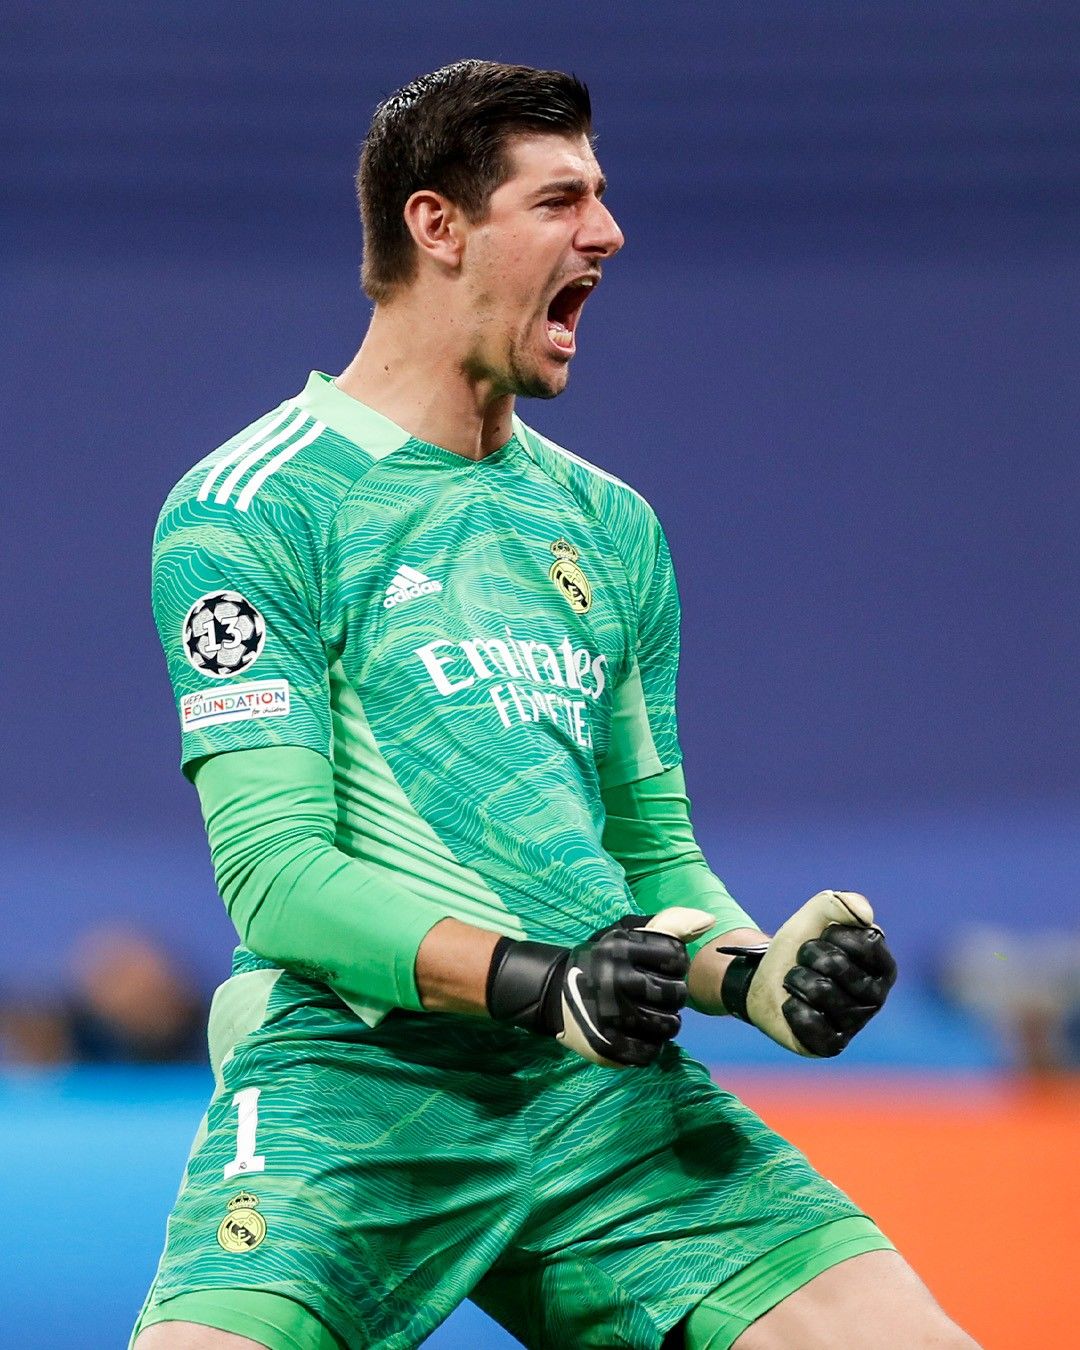 Courtois. Real madrid, Football or soccer, Thibaut courtois